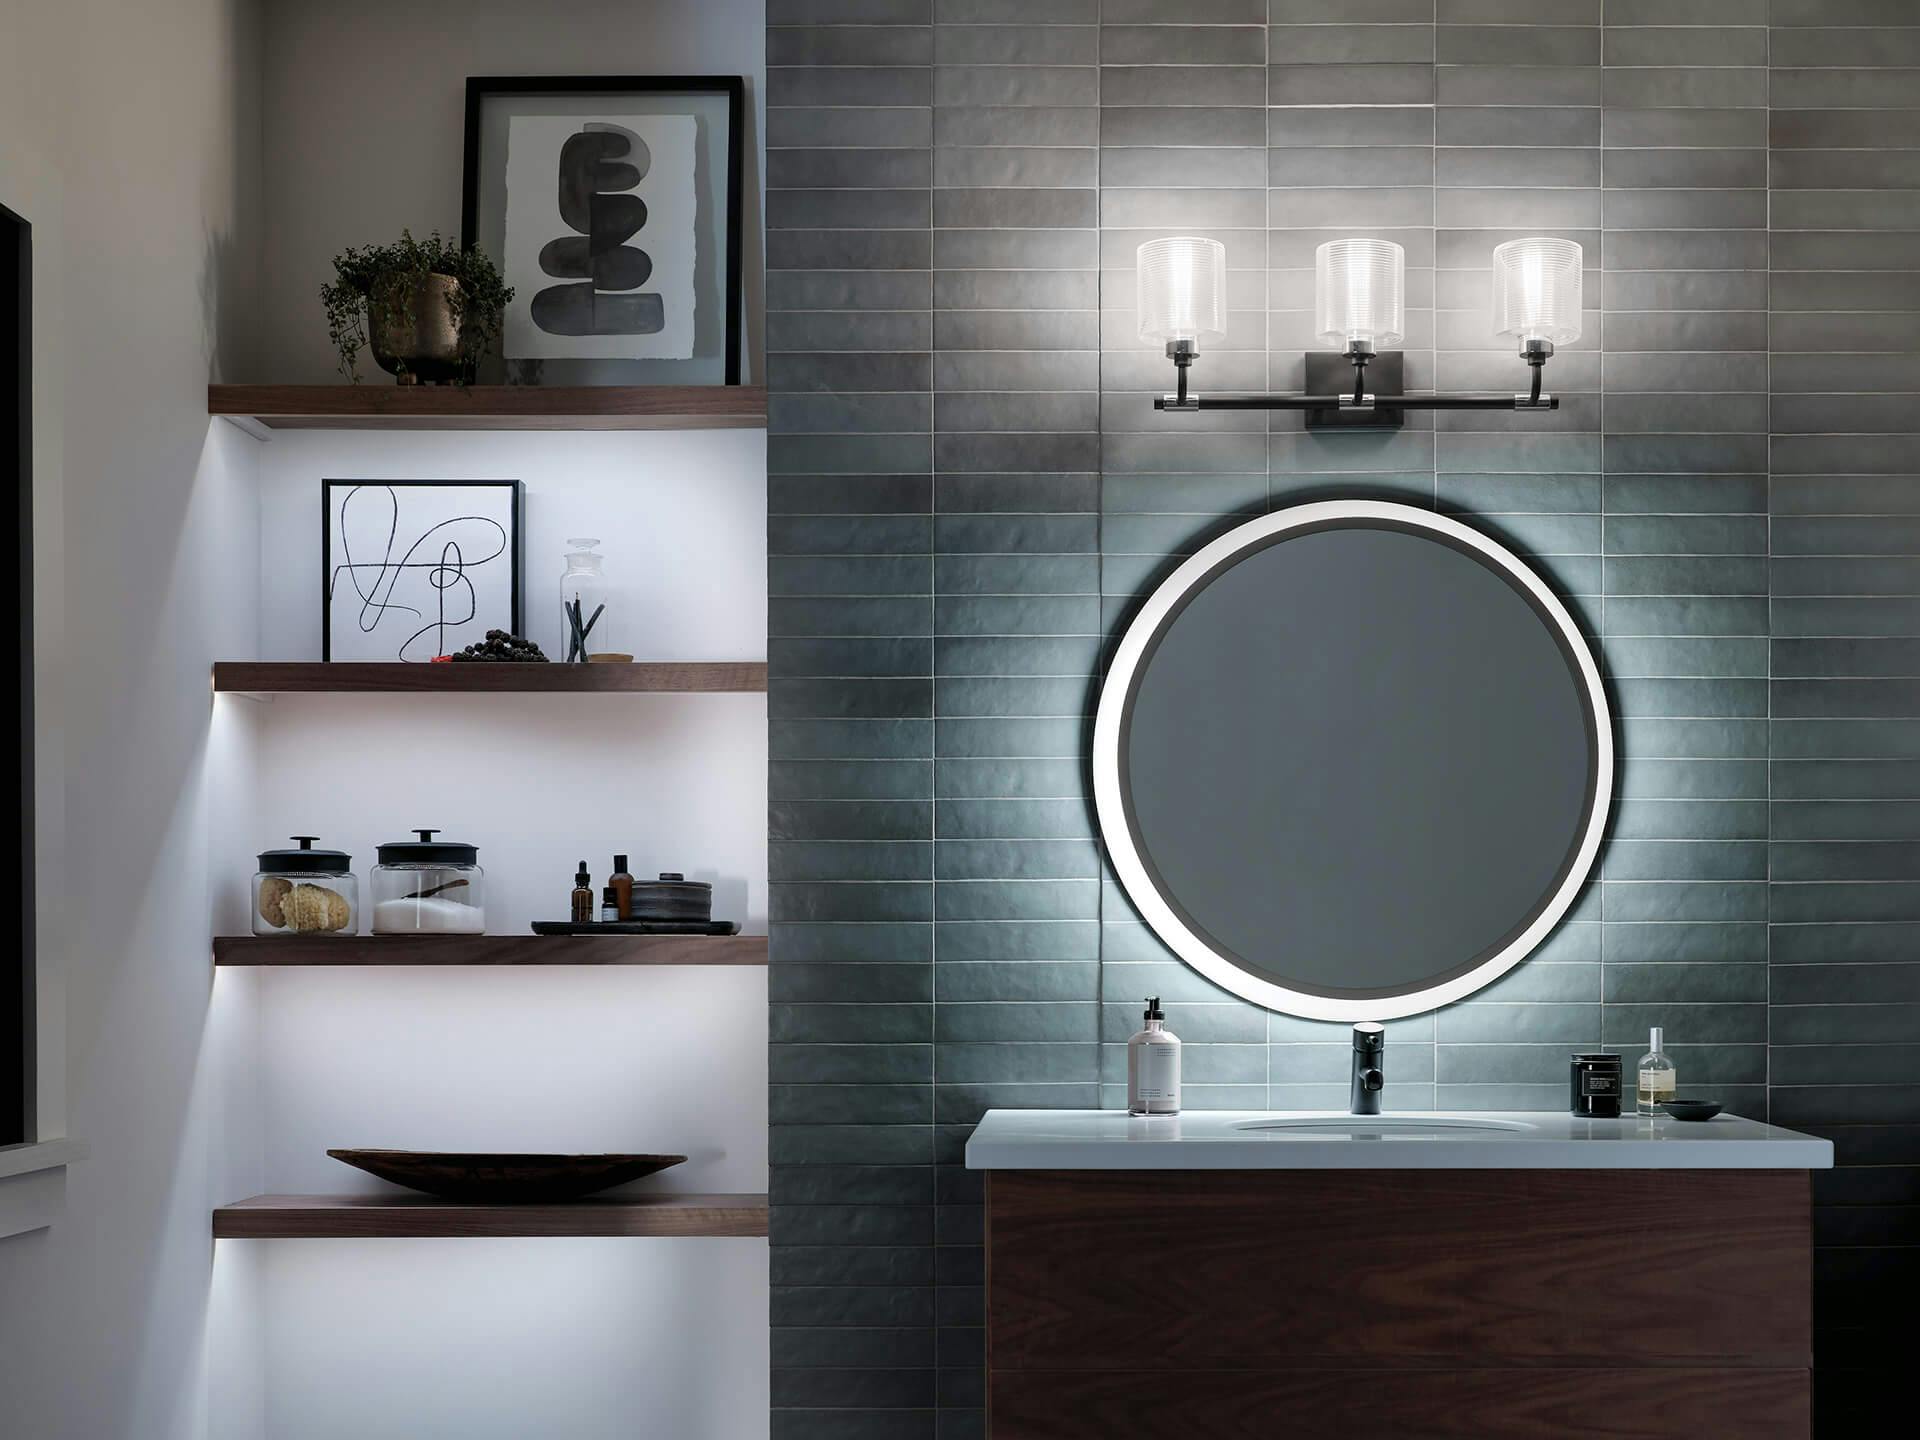 Modern bathroom at night with round LED mirror and Harvan sconce above the mirror